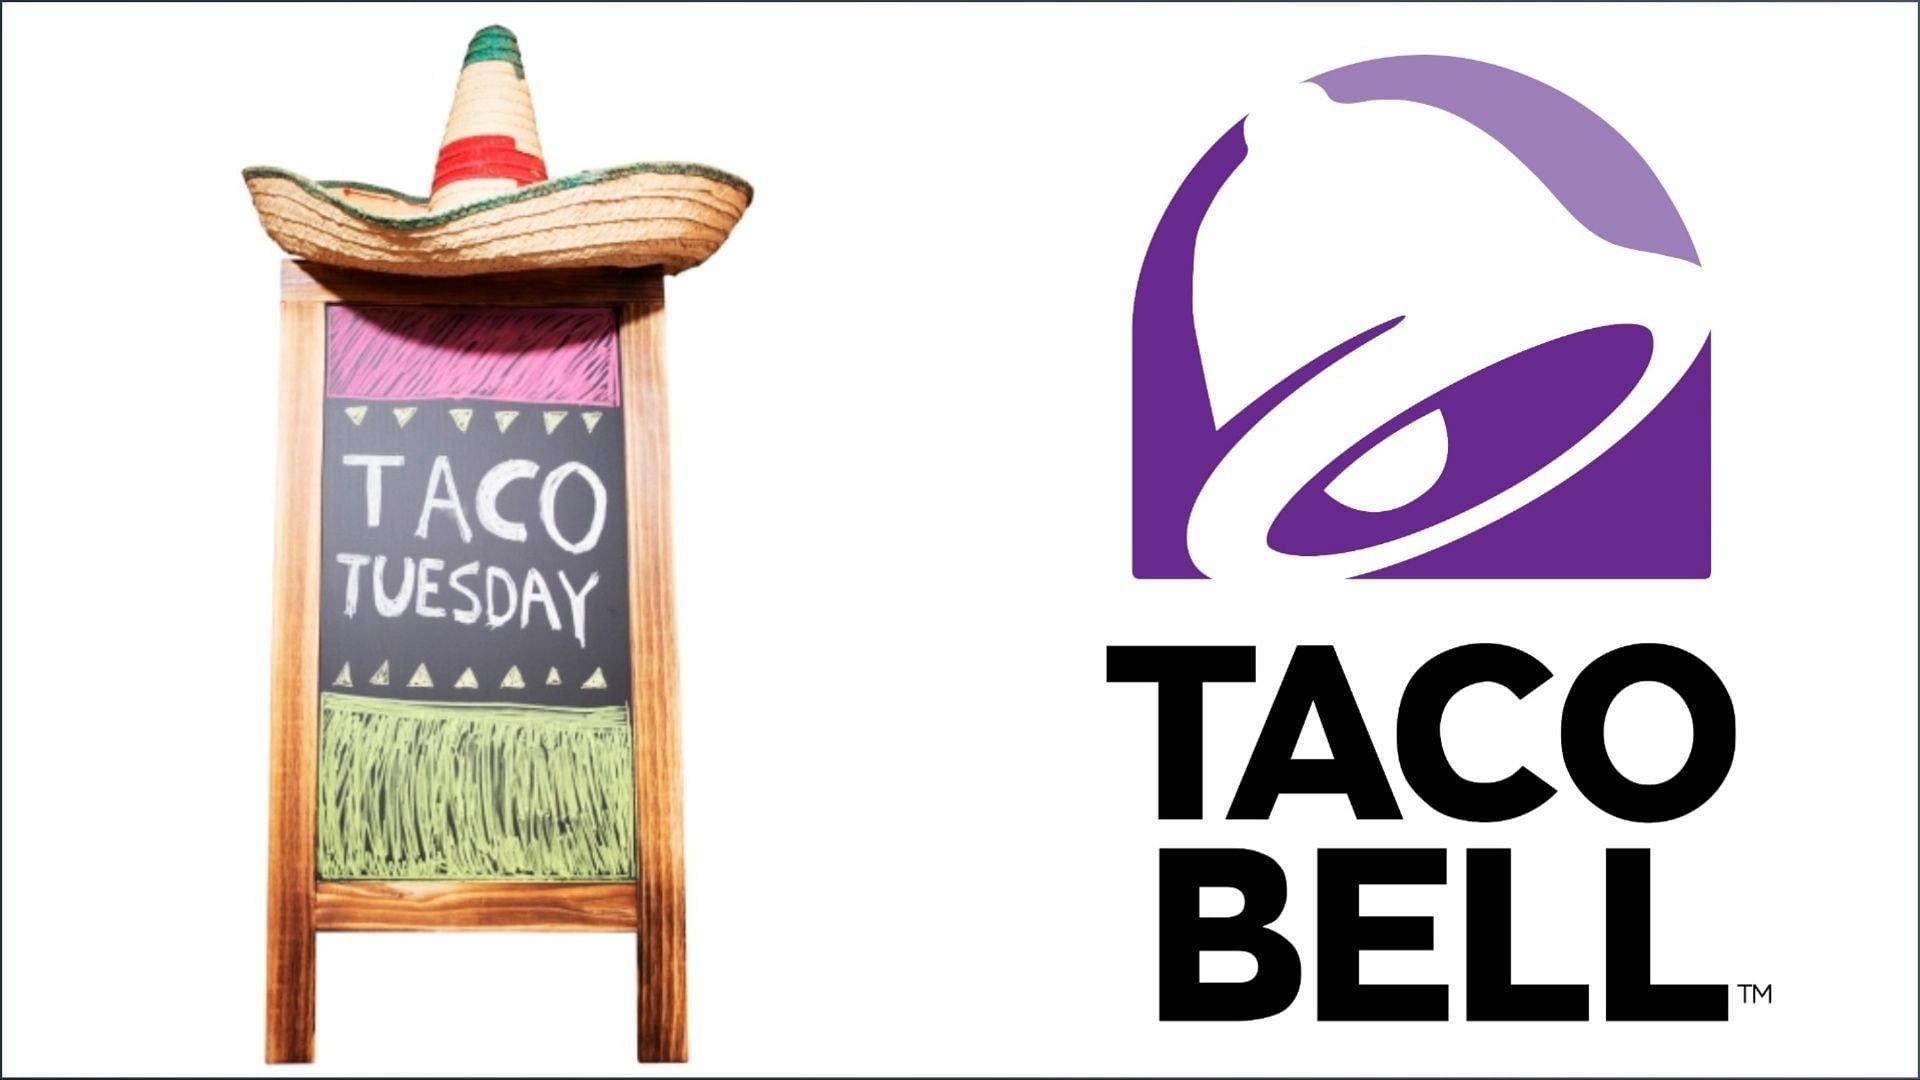 Taco Bell prevails with its campaign to liberate Taco Tuesday after Taco John&#039;s agrees to abandon the rights to the phrase in 49 states (Image via Albertc111 / Getty Images / Taco Bell)